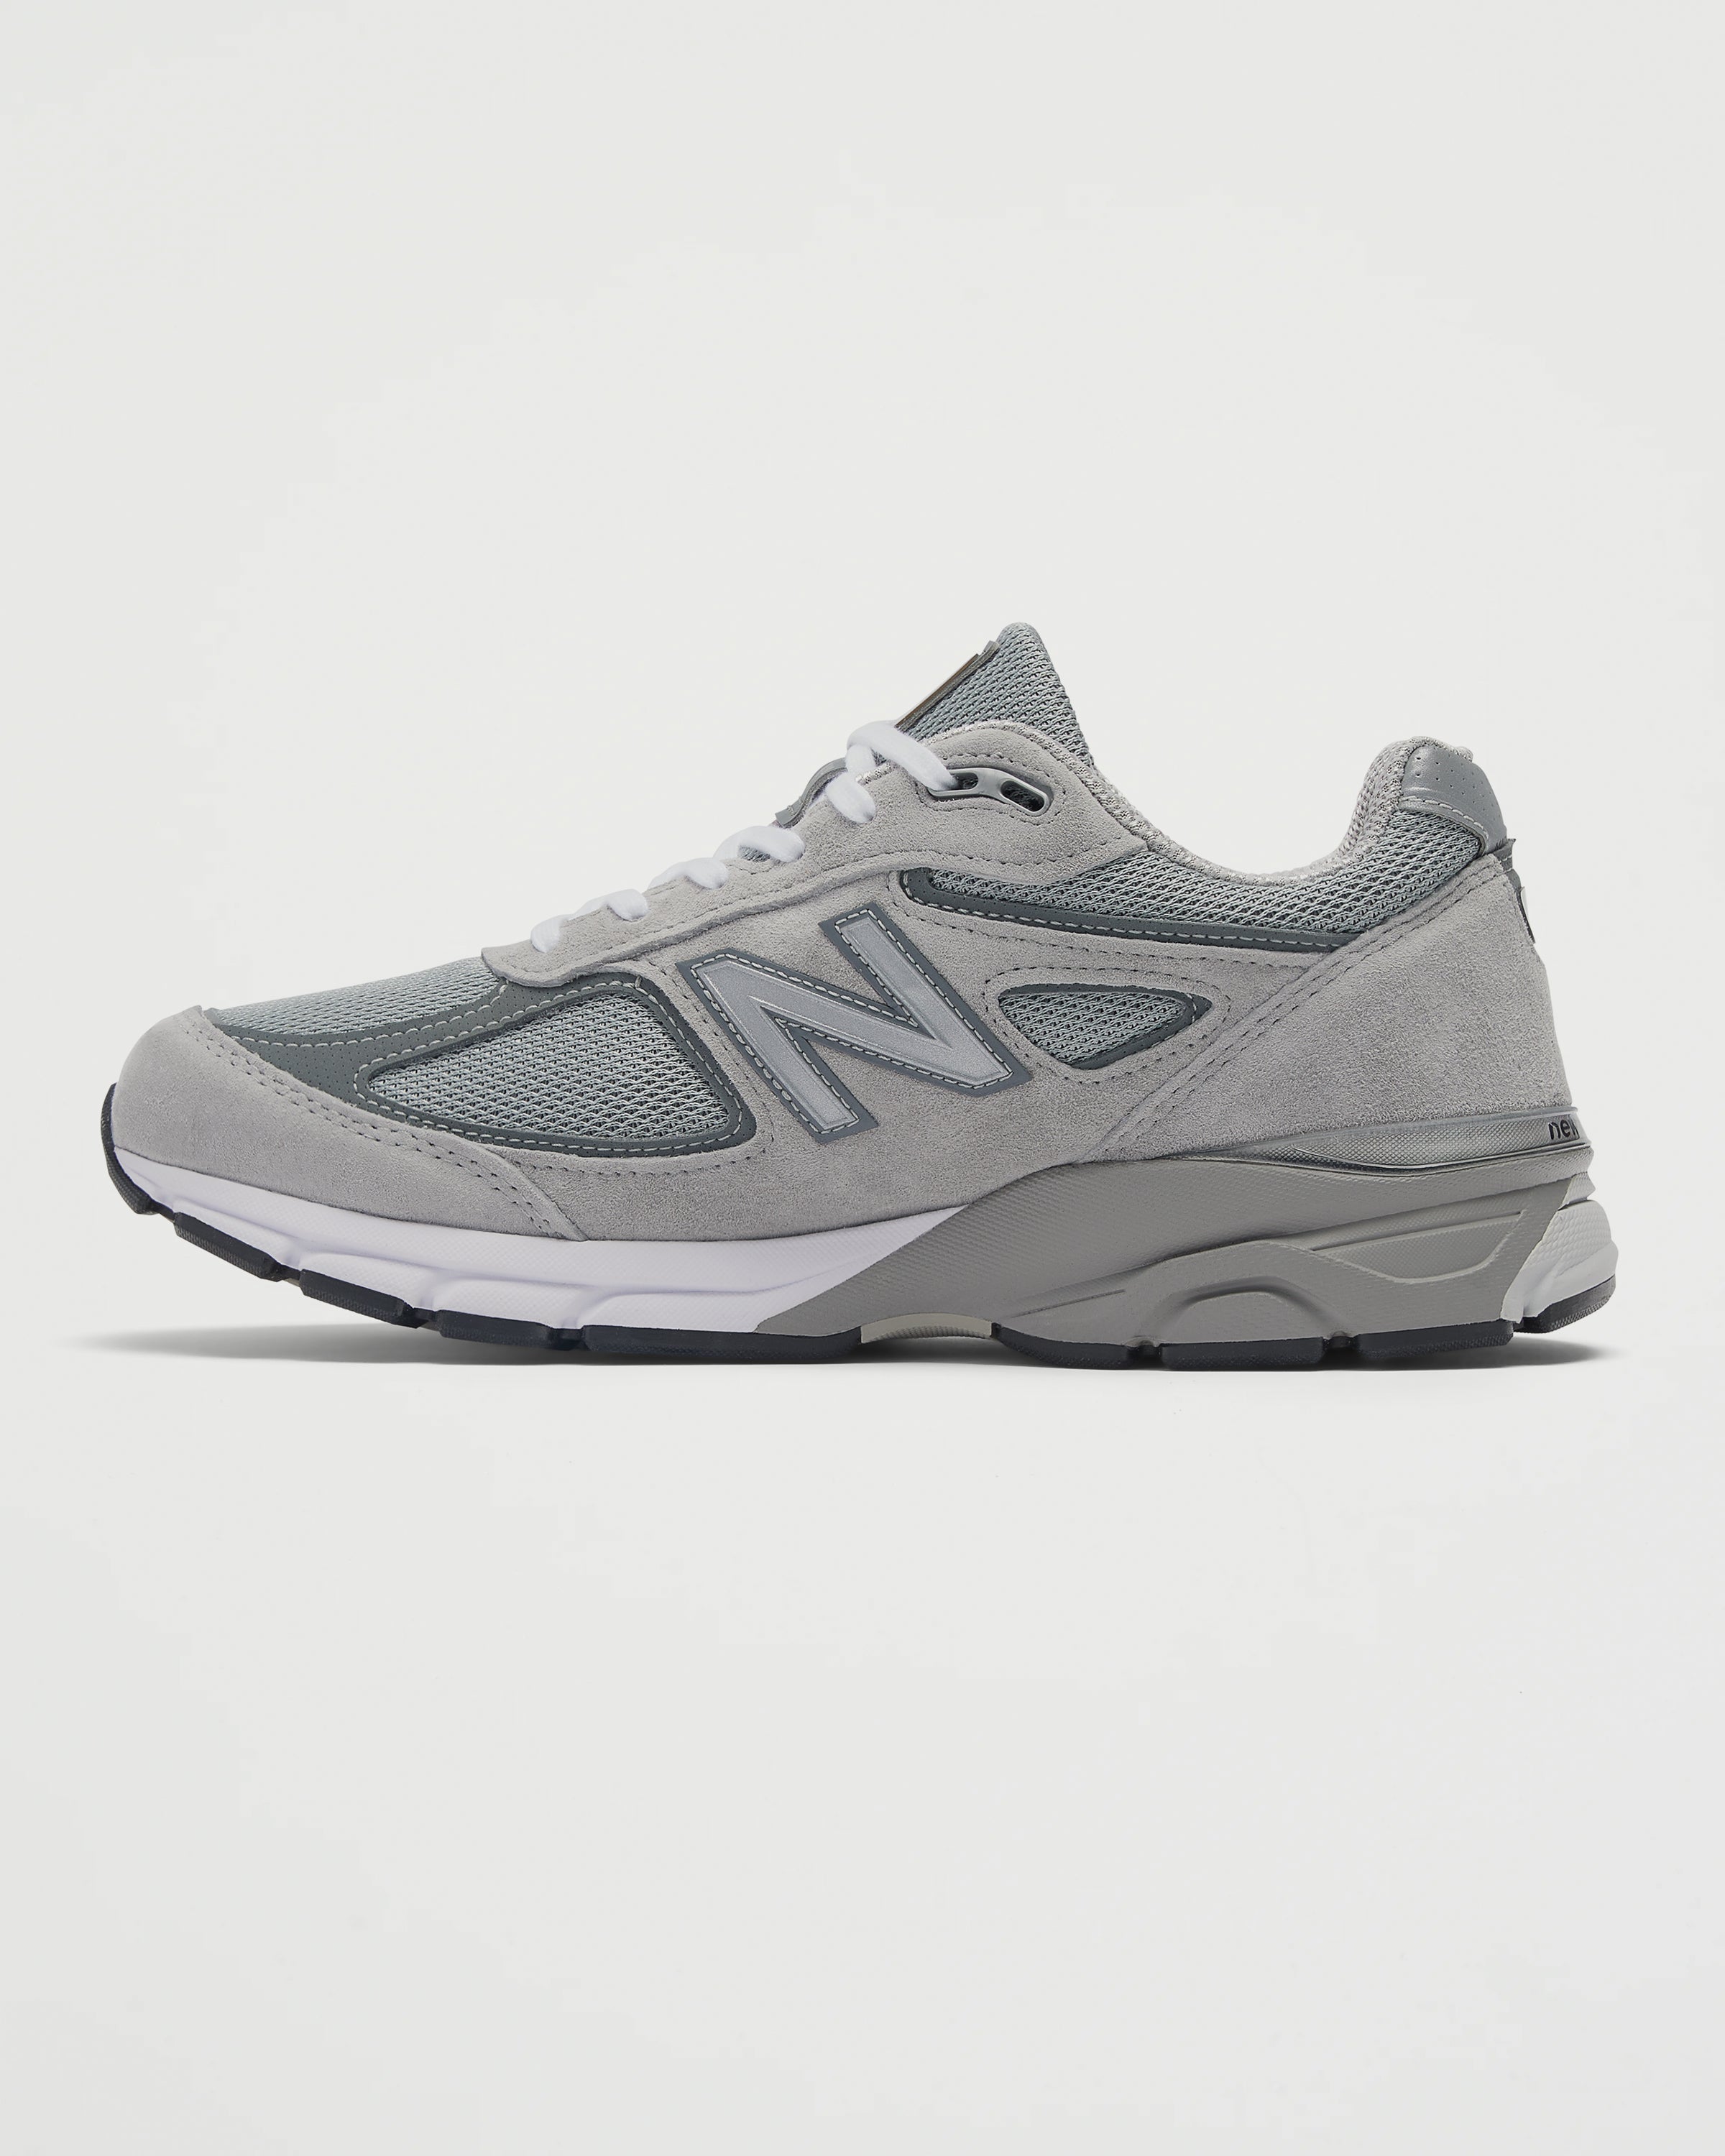 New Balance 990v4 'Made in USA' Grey Shoes Sneakers Unisex